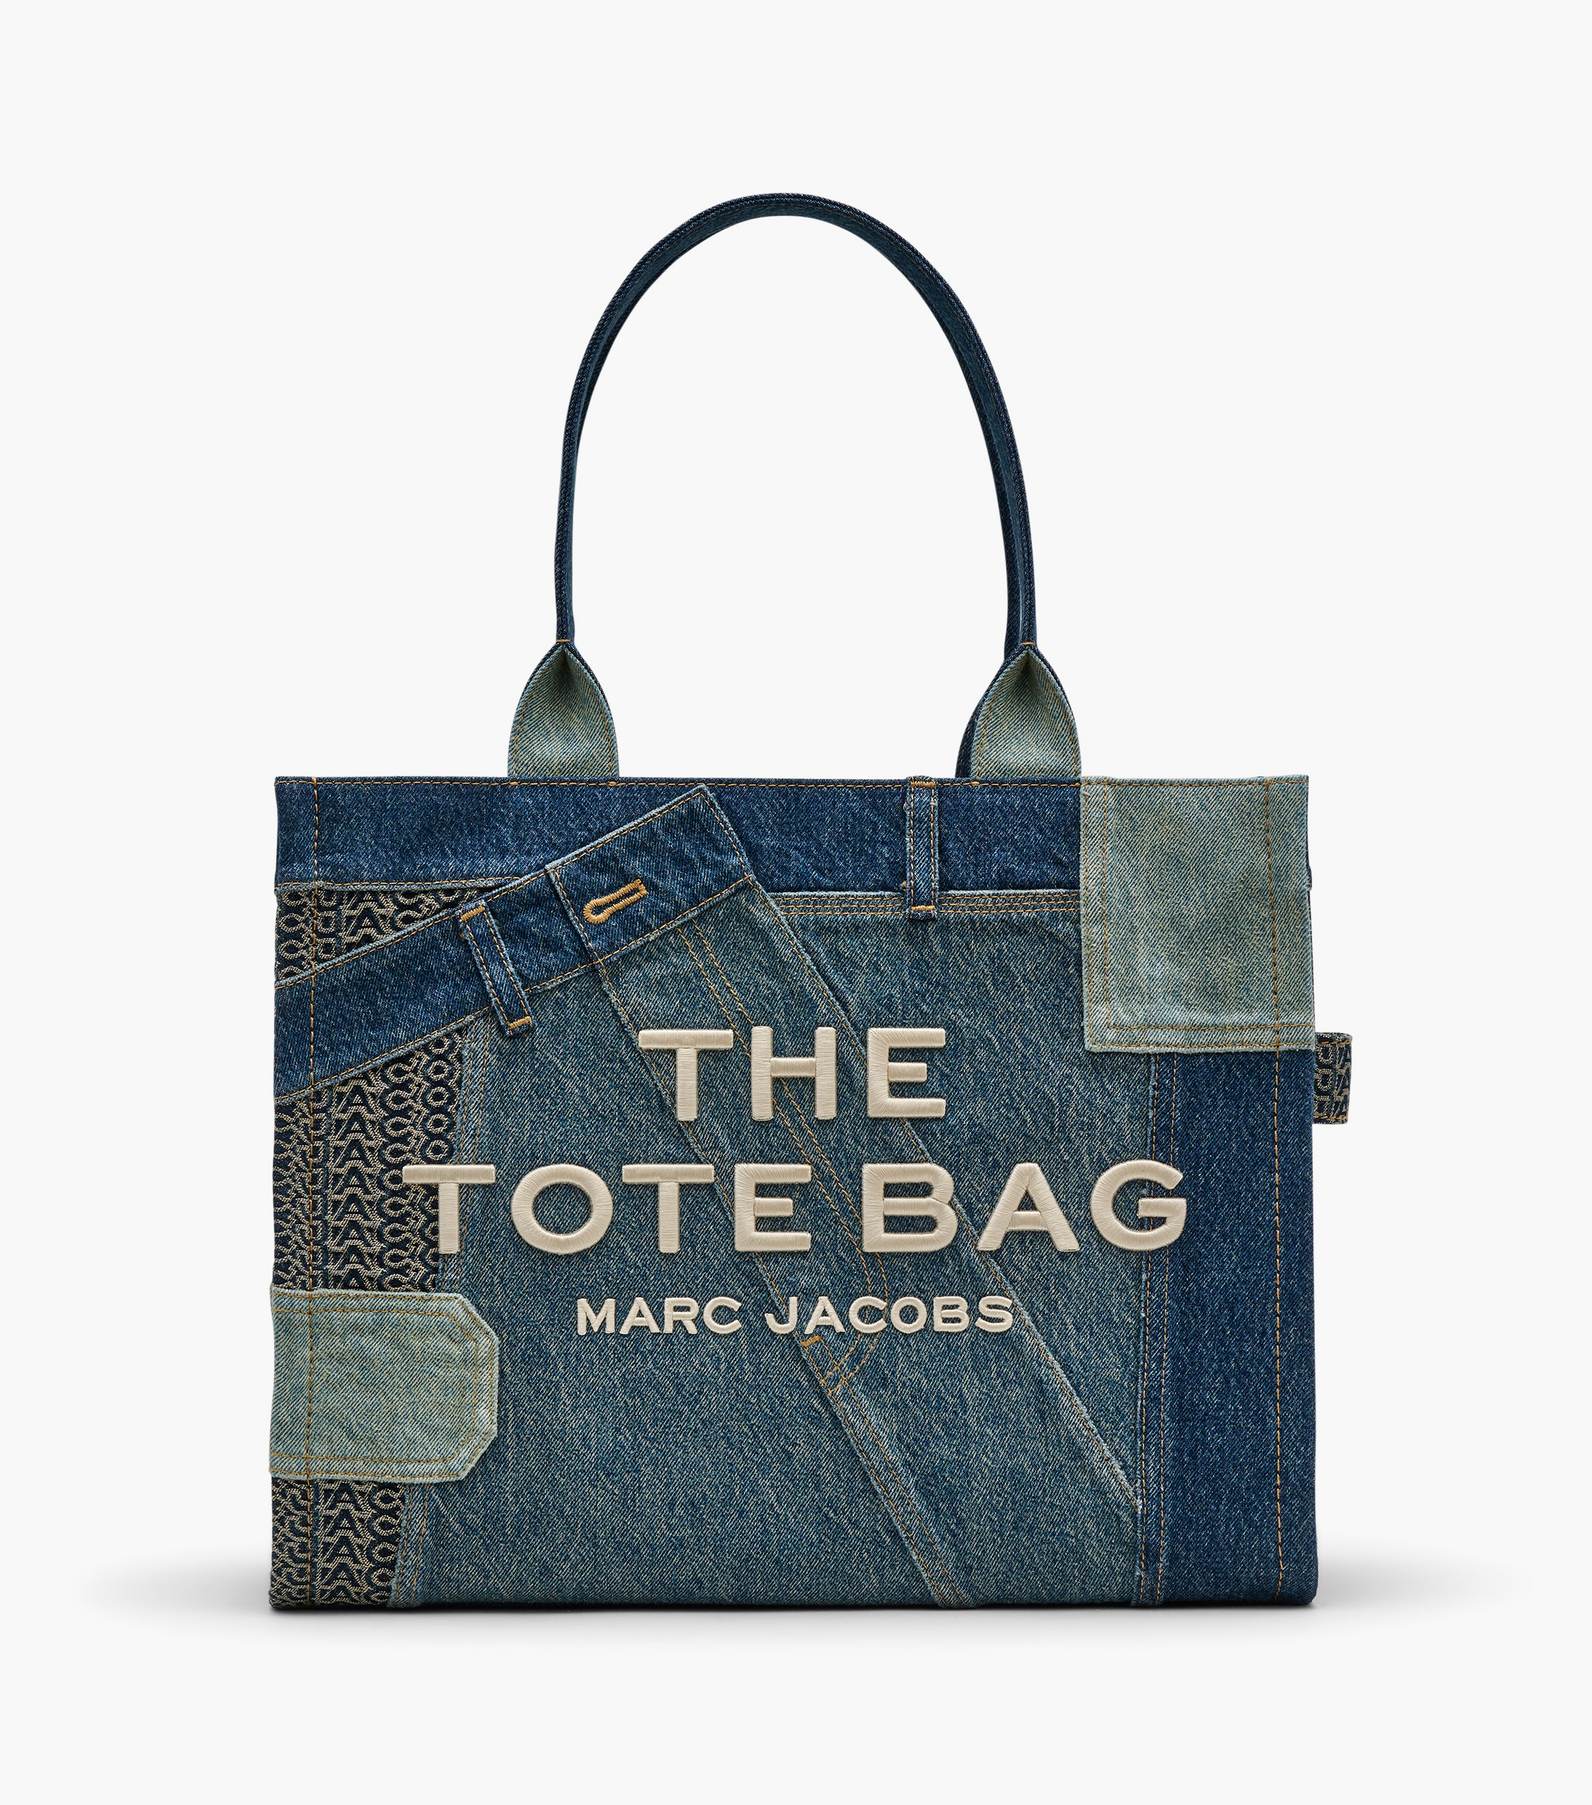 THE DECONSTRUCTED DENIM TOTE BAG LARGE